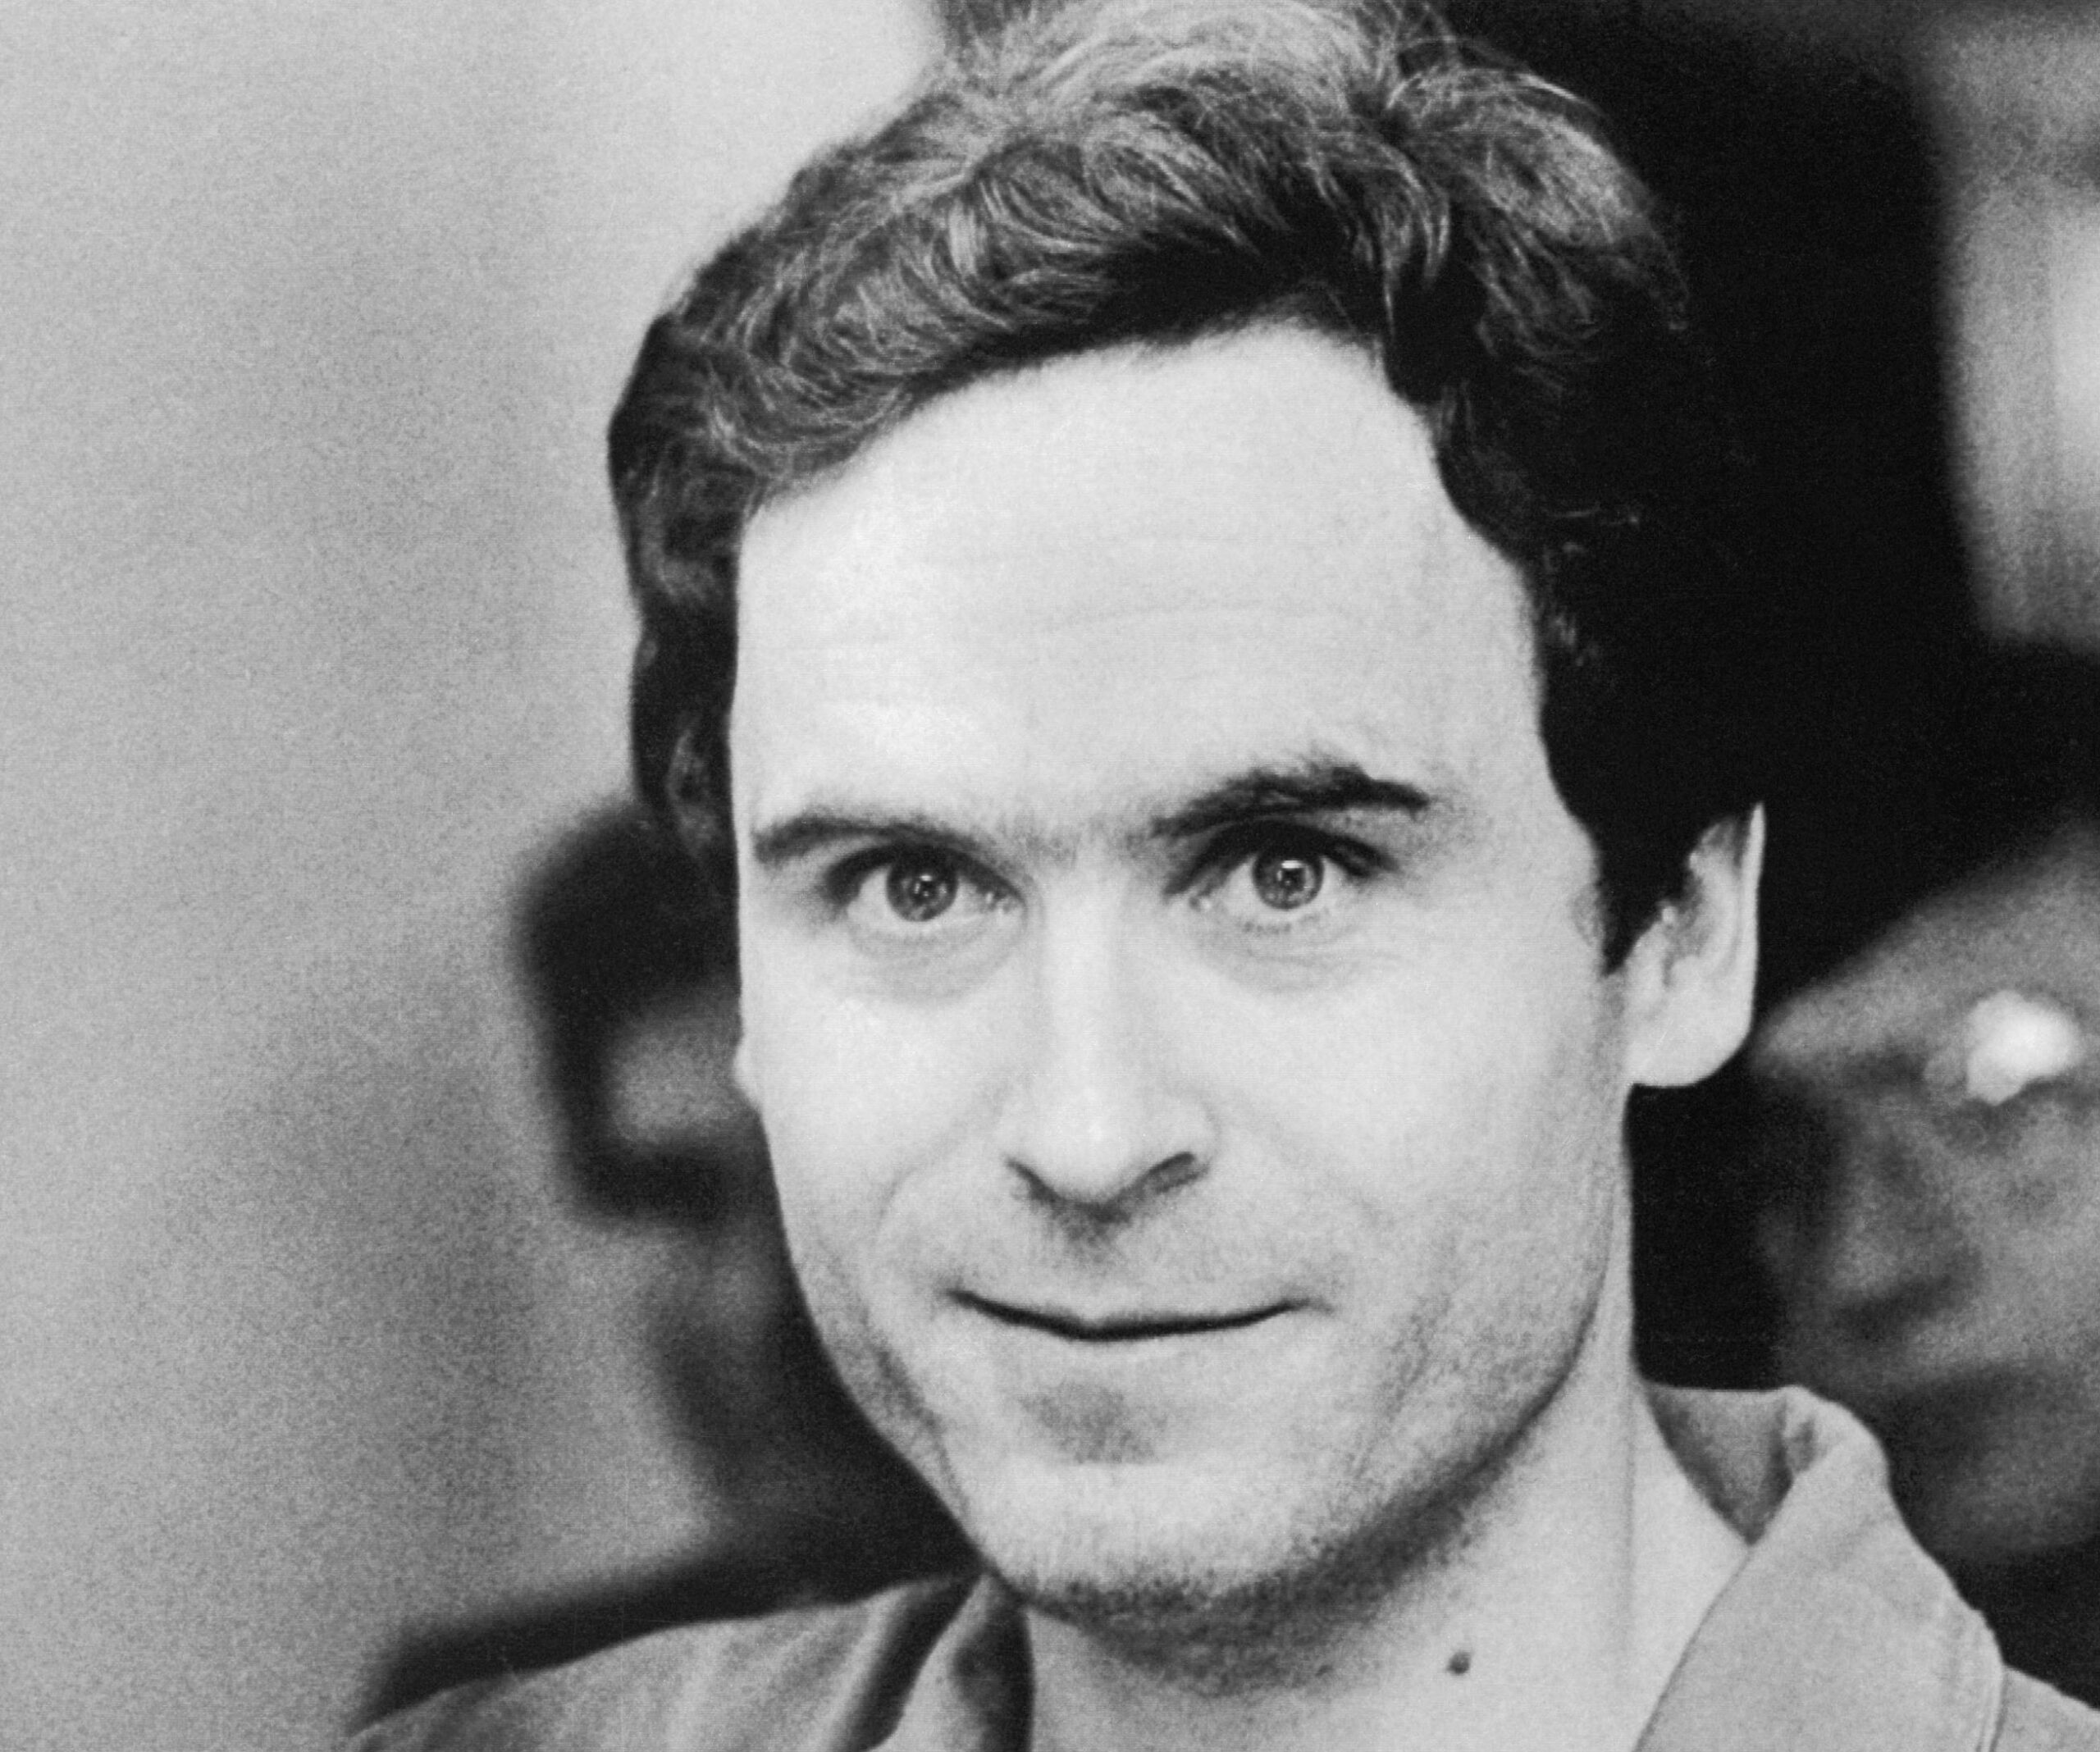 Everything you need to know about notorious serial killer Ted Bundy